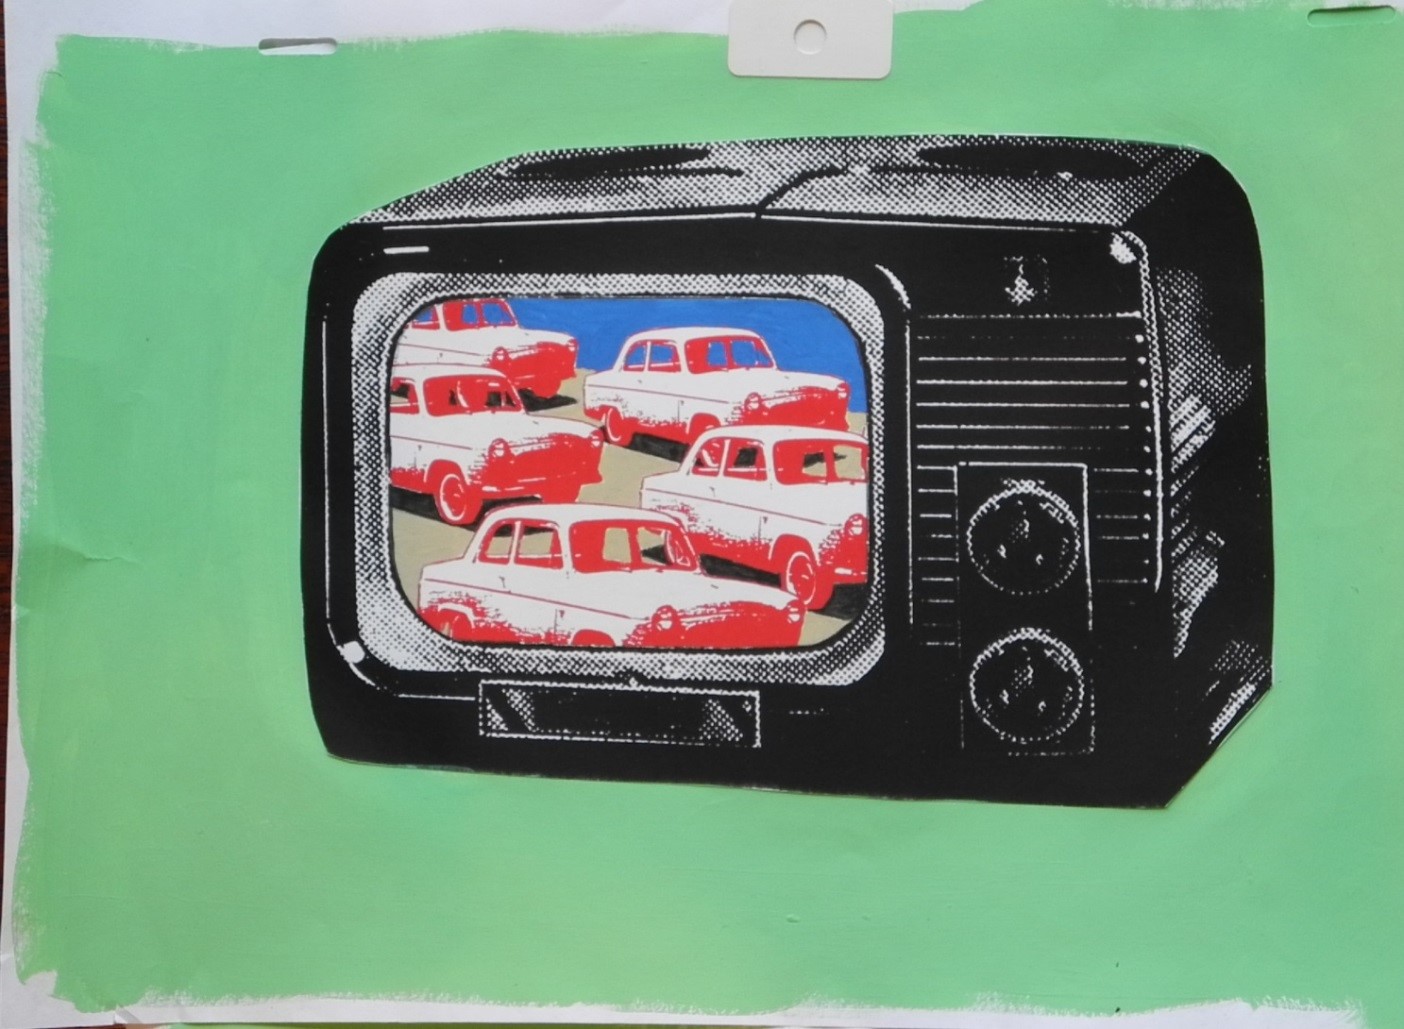 Animation design from the Run Wrake Archive showing a collage of a television set with cars on the screen, against a green background